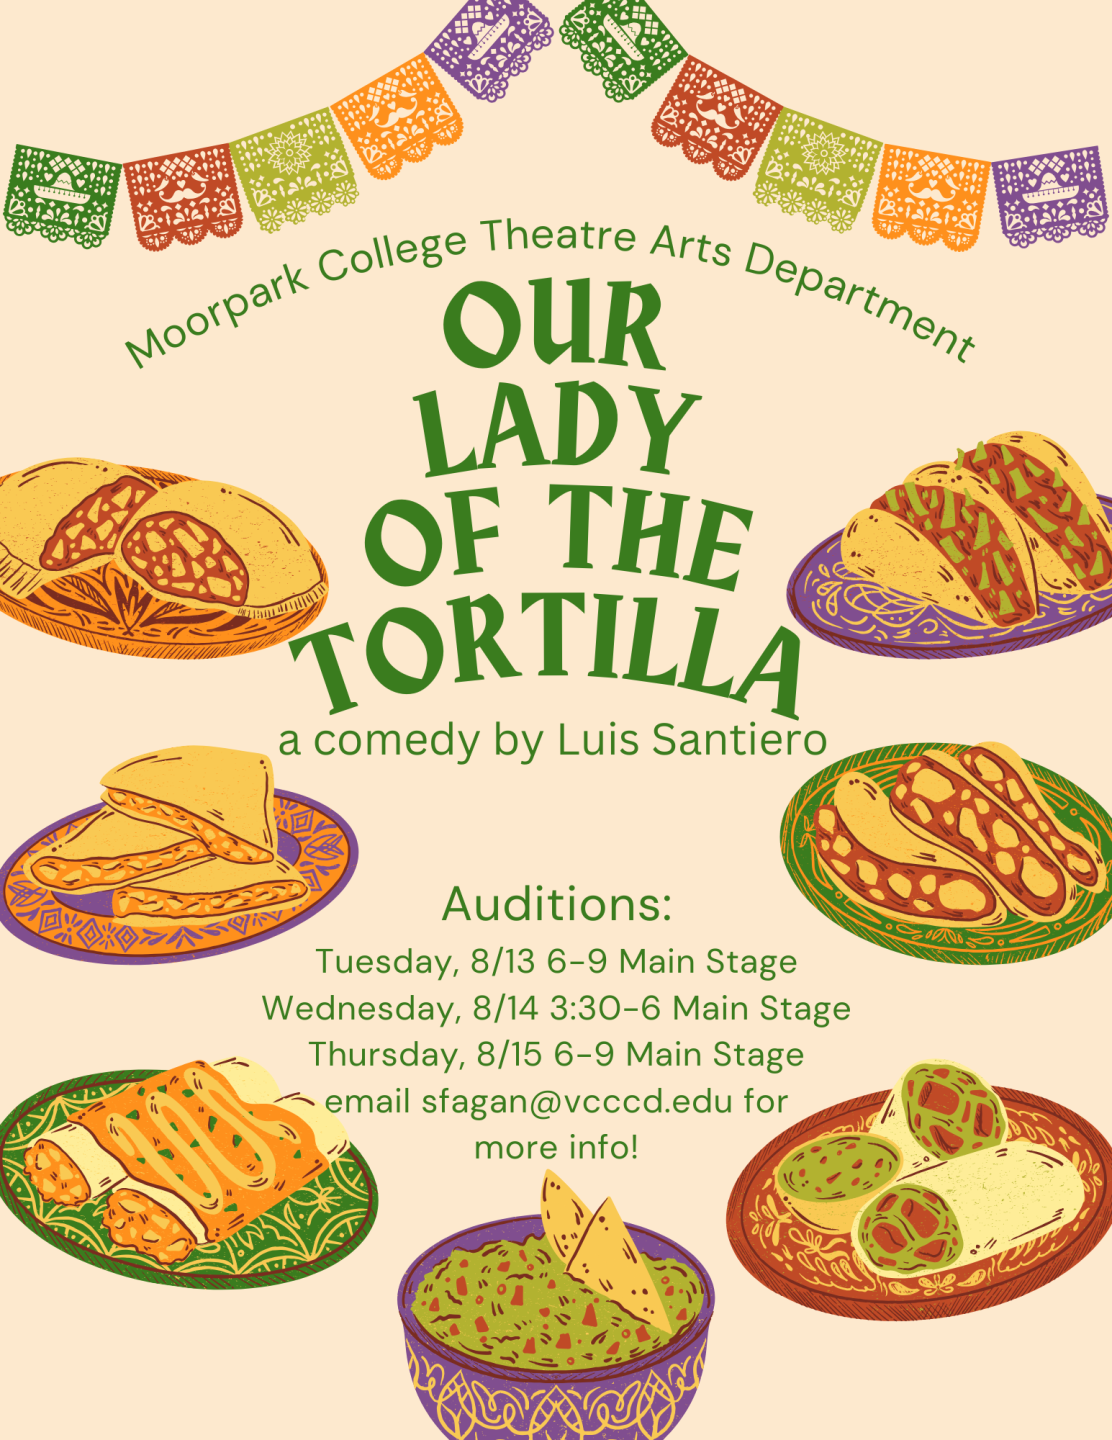 "Our Lady of the Tortilla" Auditions